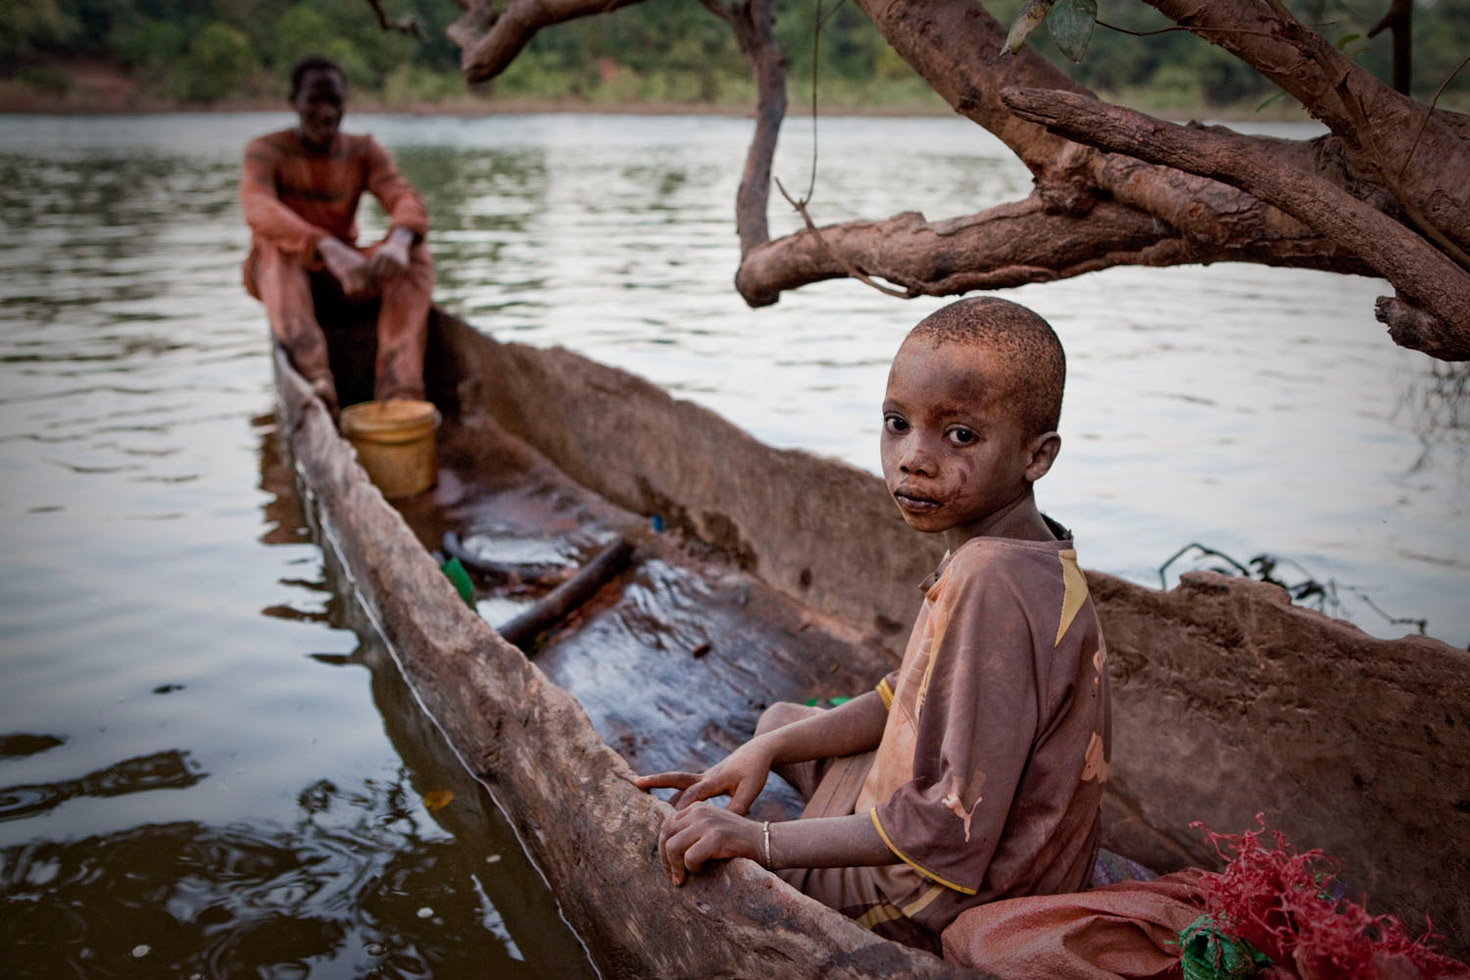 A young mine worker waits to be ferried across the River Gambia after working with his father at one of eastern Senegal's artisanal gold mines.